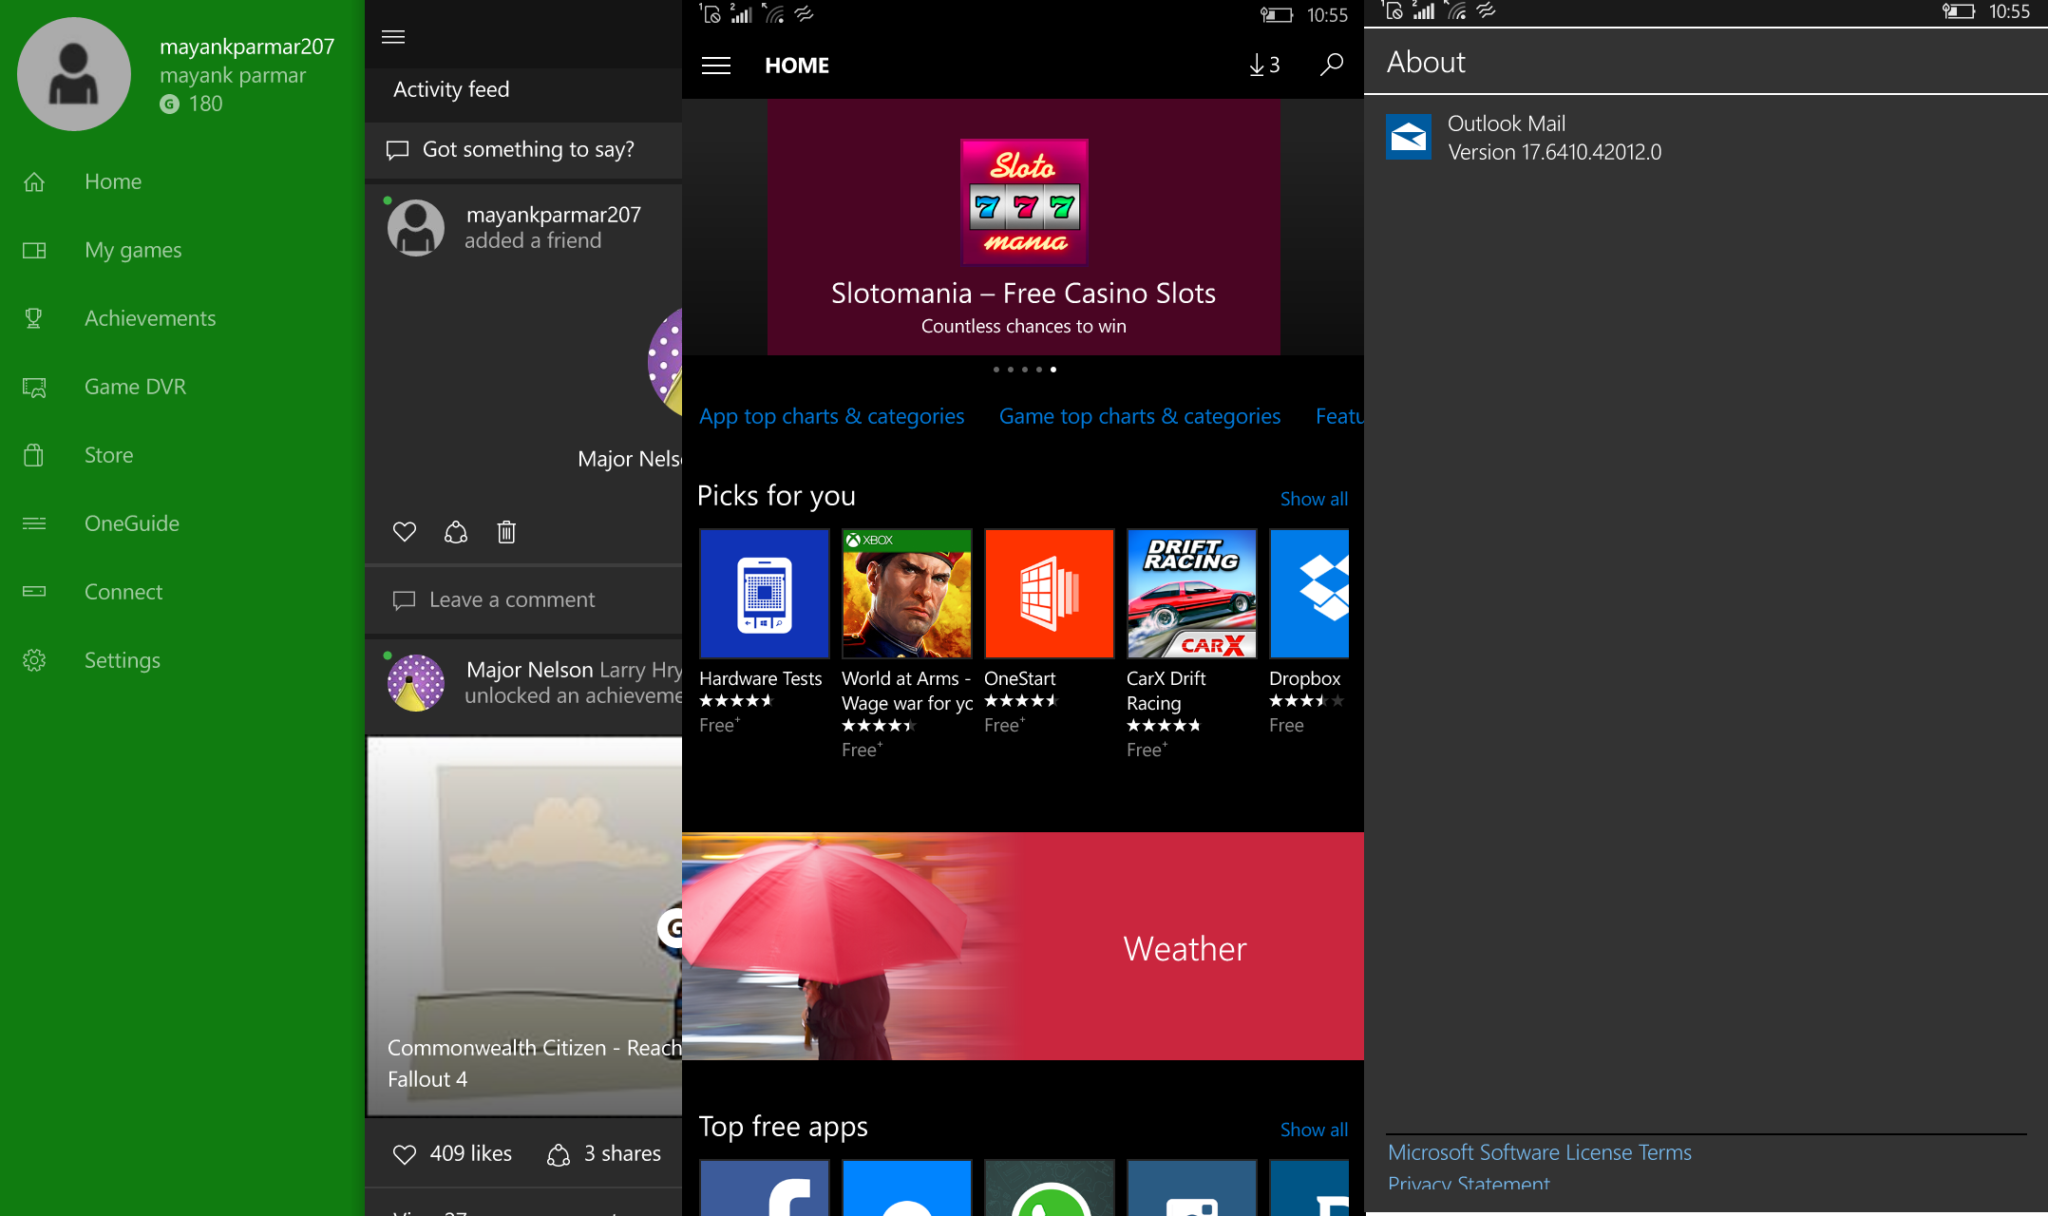 Windows 10 Mobile Xbox app gets updated in Store